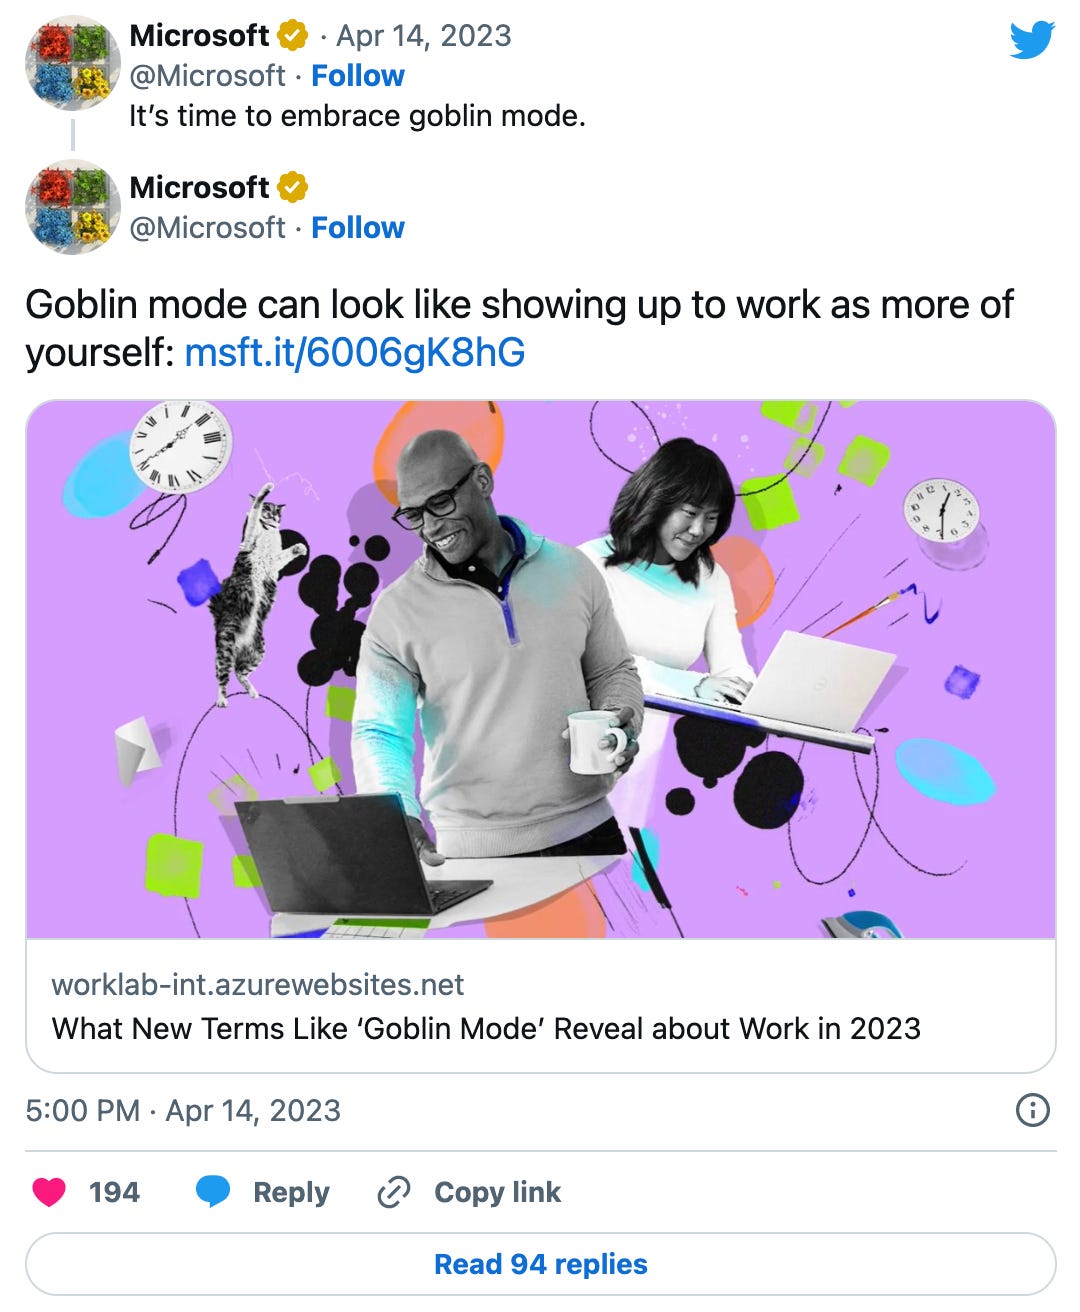 Tweet from Microsoft on April 14th of the year of our lord 2023: “It’s time to embrace goblin mode.” followed by the even more baffling assertion that ”Goblin mode can look like showing up to work as more of yourself.” Microsoft you’re drunk.